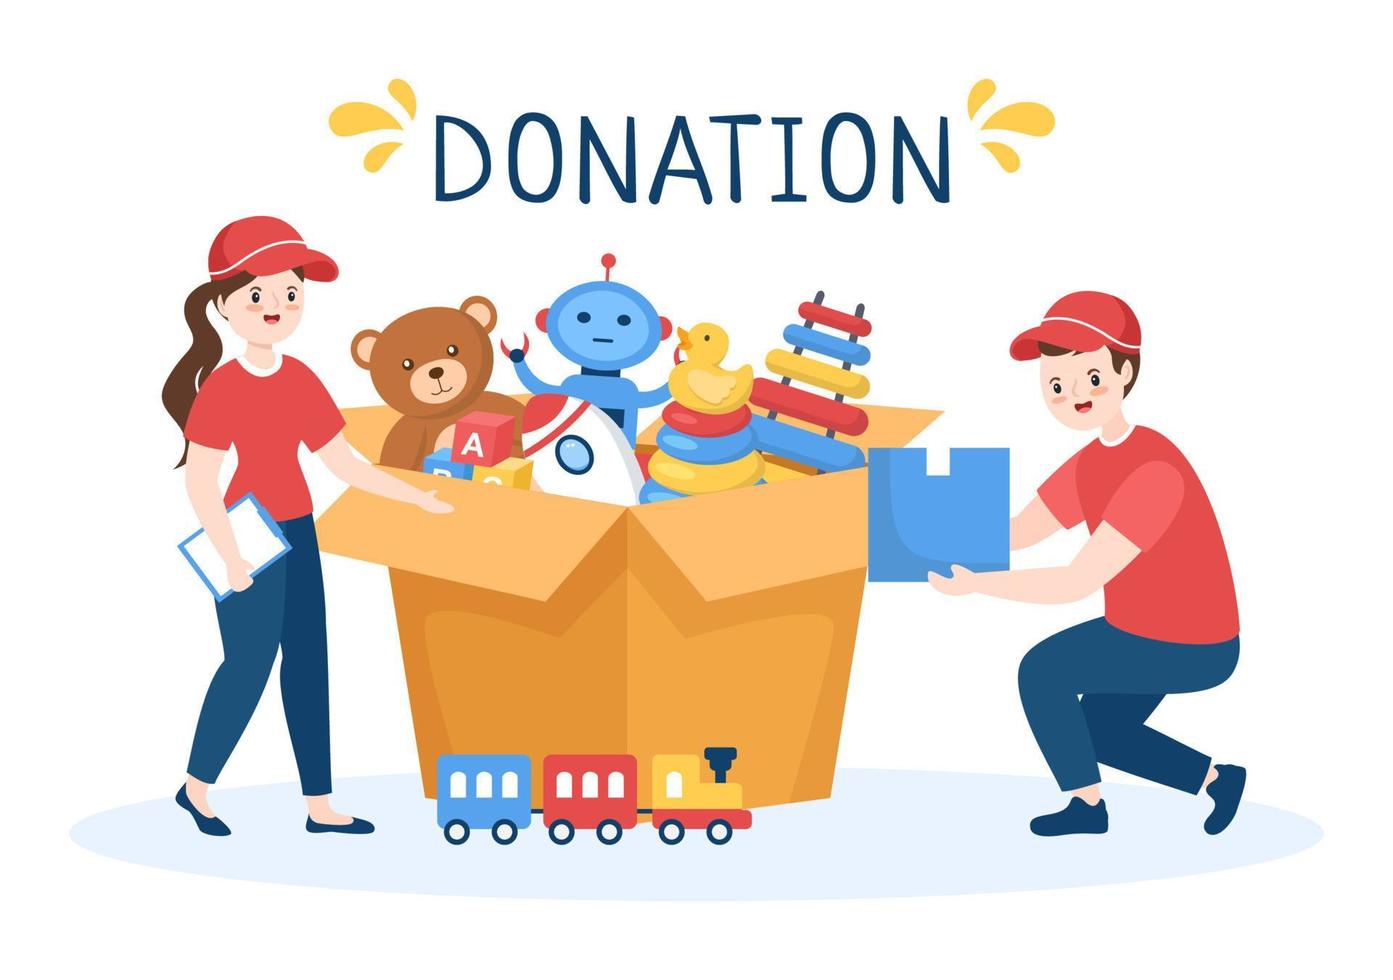 Cardboard Donation Box Containing Toys for Children, Social Care, Volunteering and Charity in Hand Drawn Cartoon Flat Illustration vector